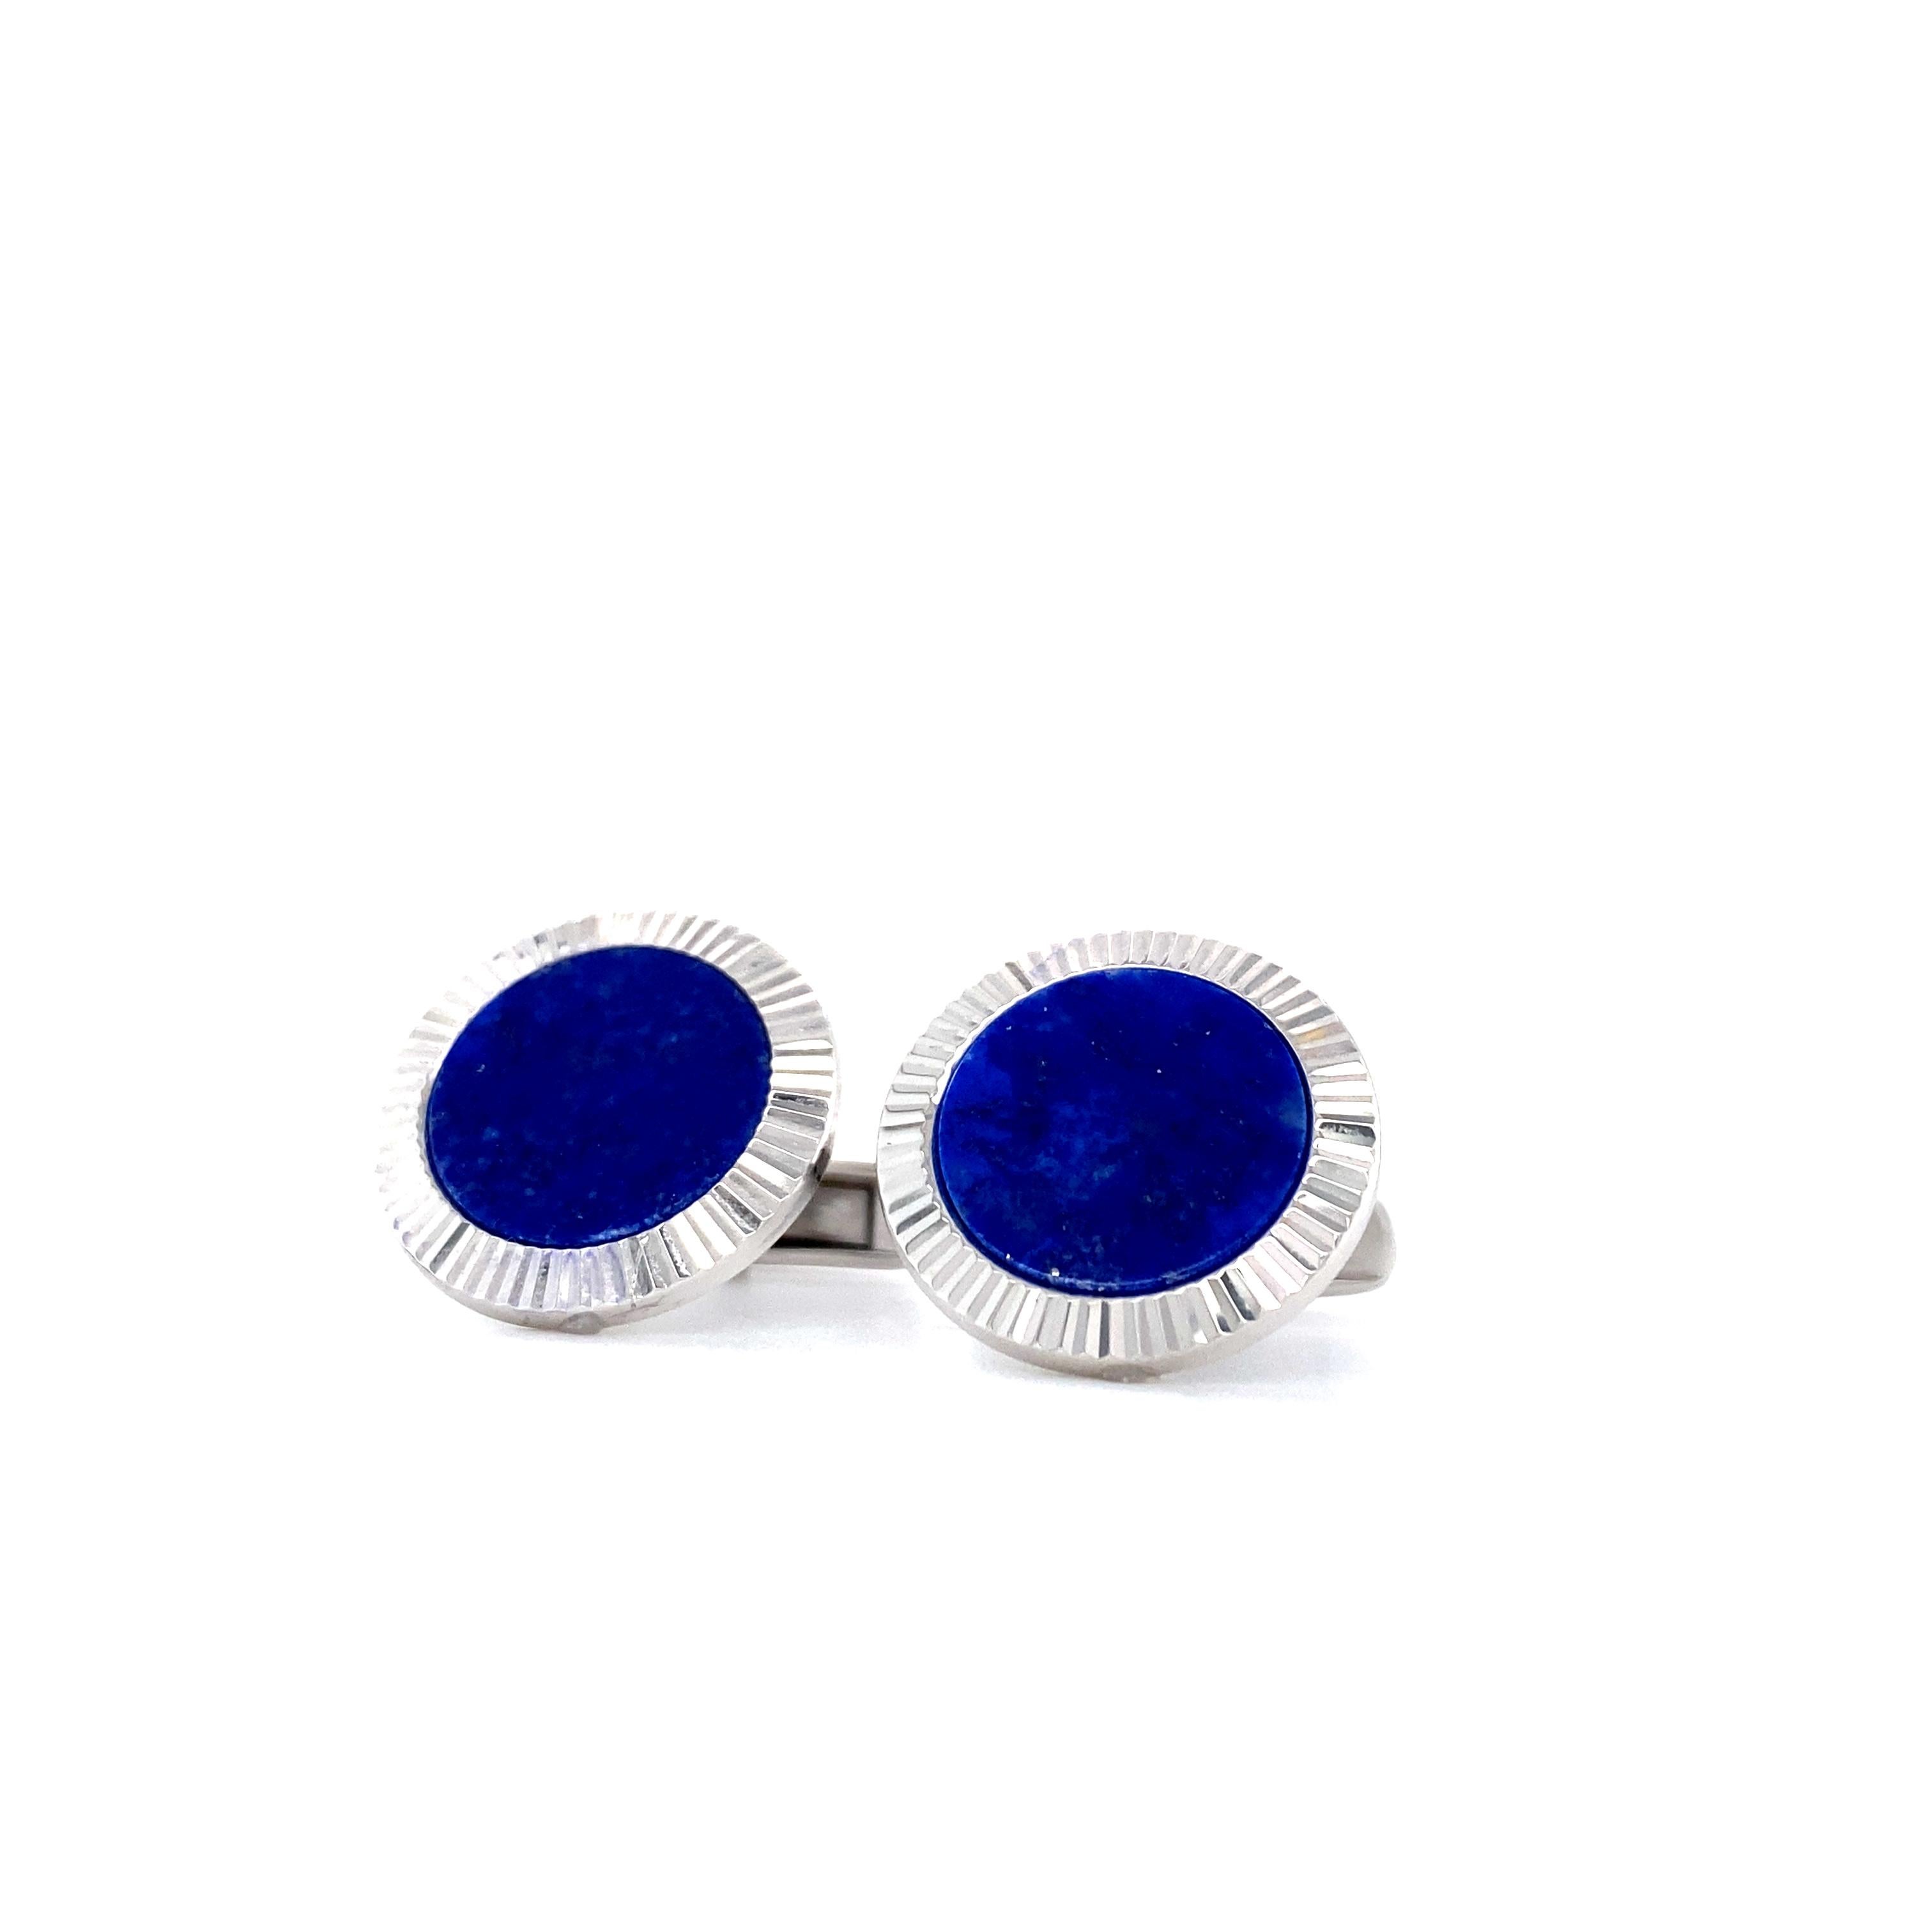 Fluted Round Lapis Lazuli Cufflinks in Solid 925 Sterling Silver, Rhodium Plated For Sale 2